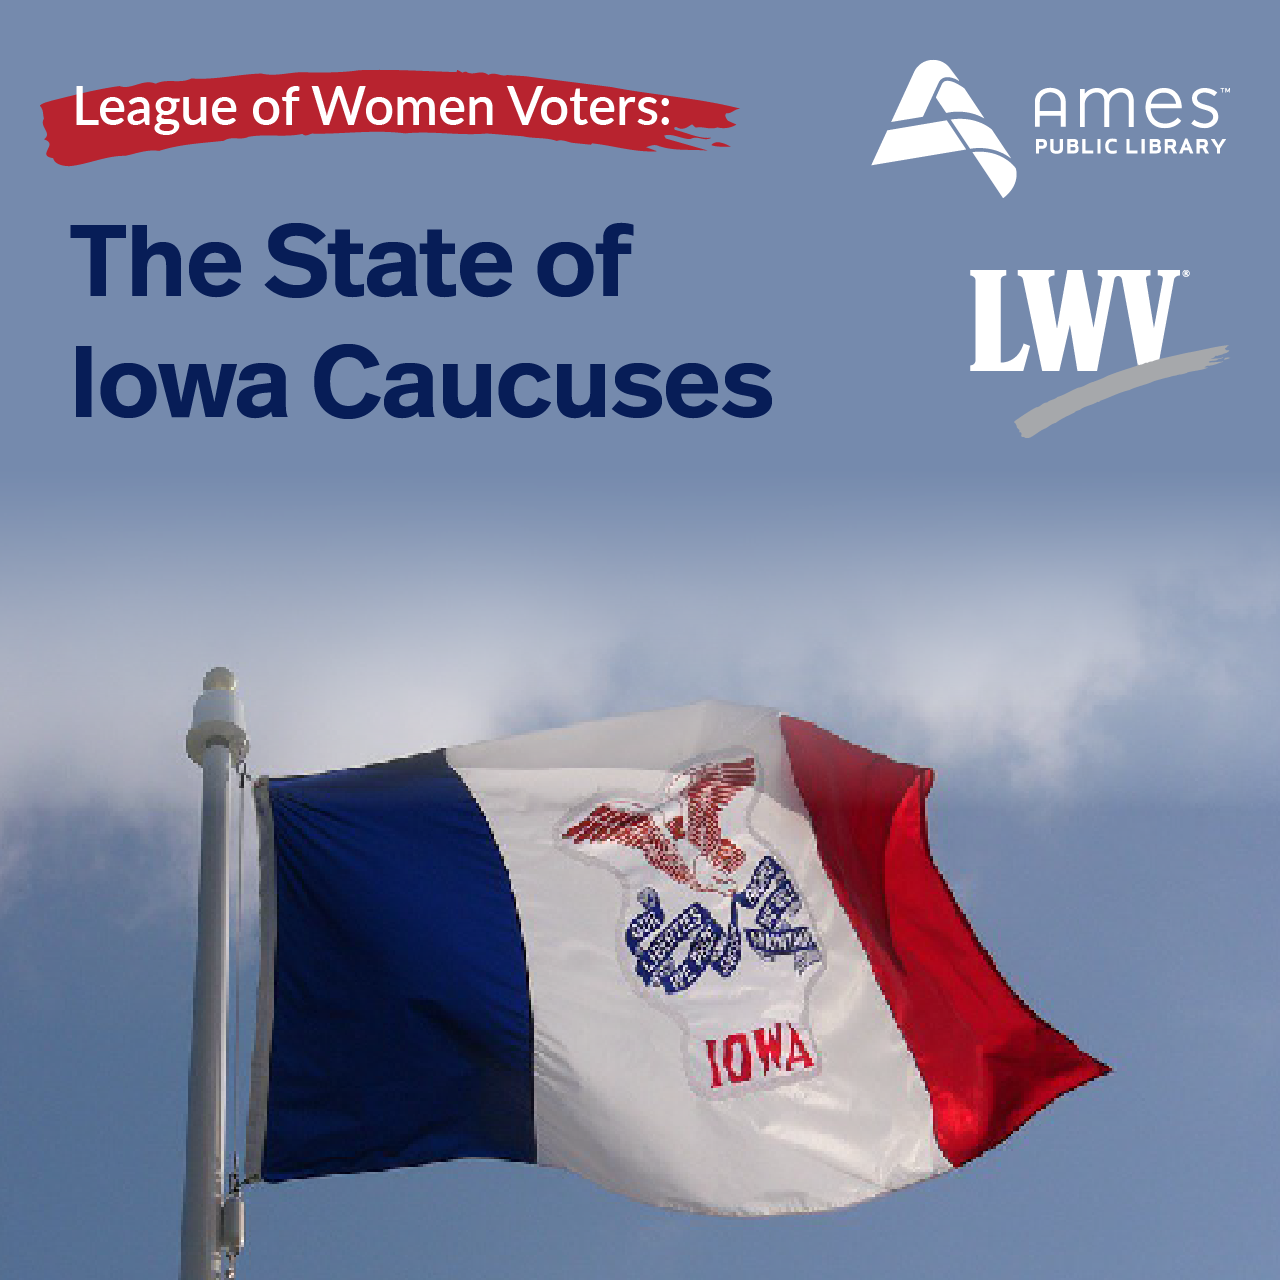 The State of Iowa Caucuses